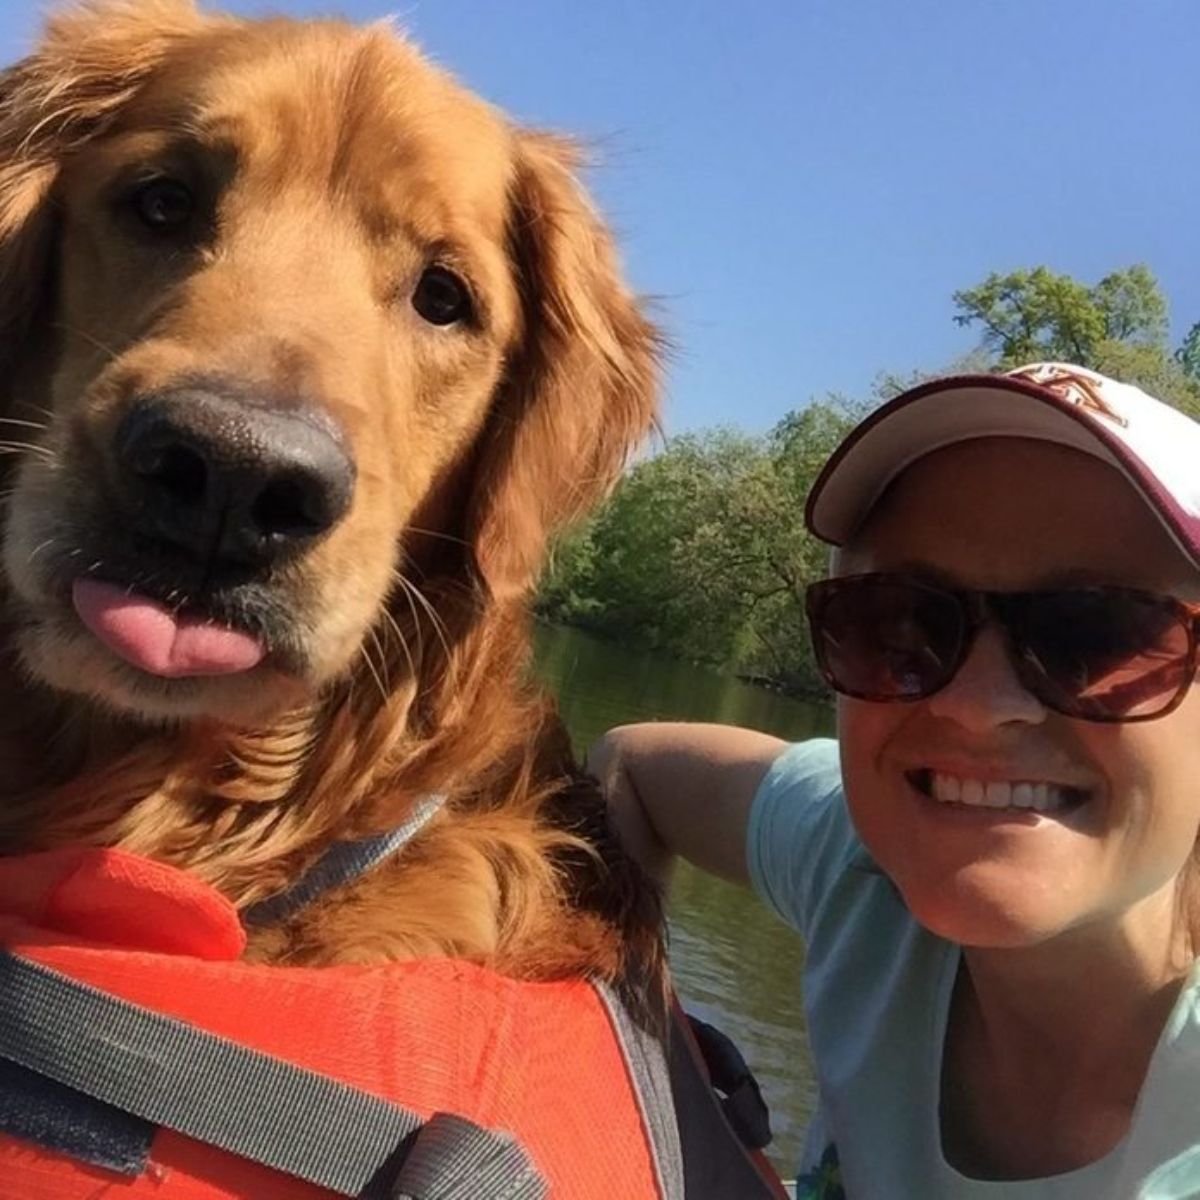 woman posing with golden retriever who has its tongue sticking out slightly